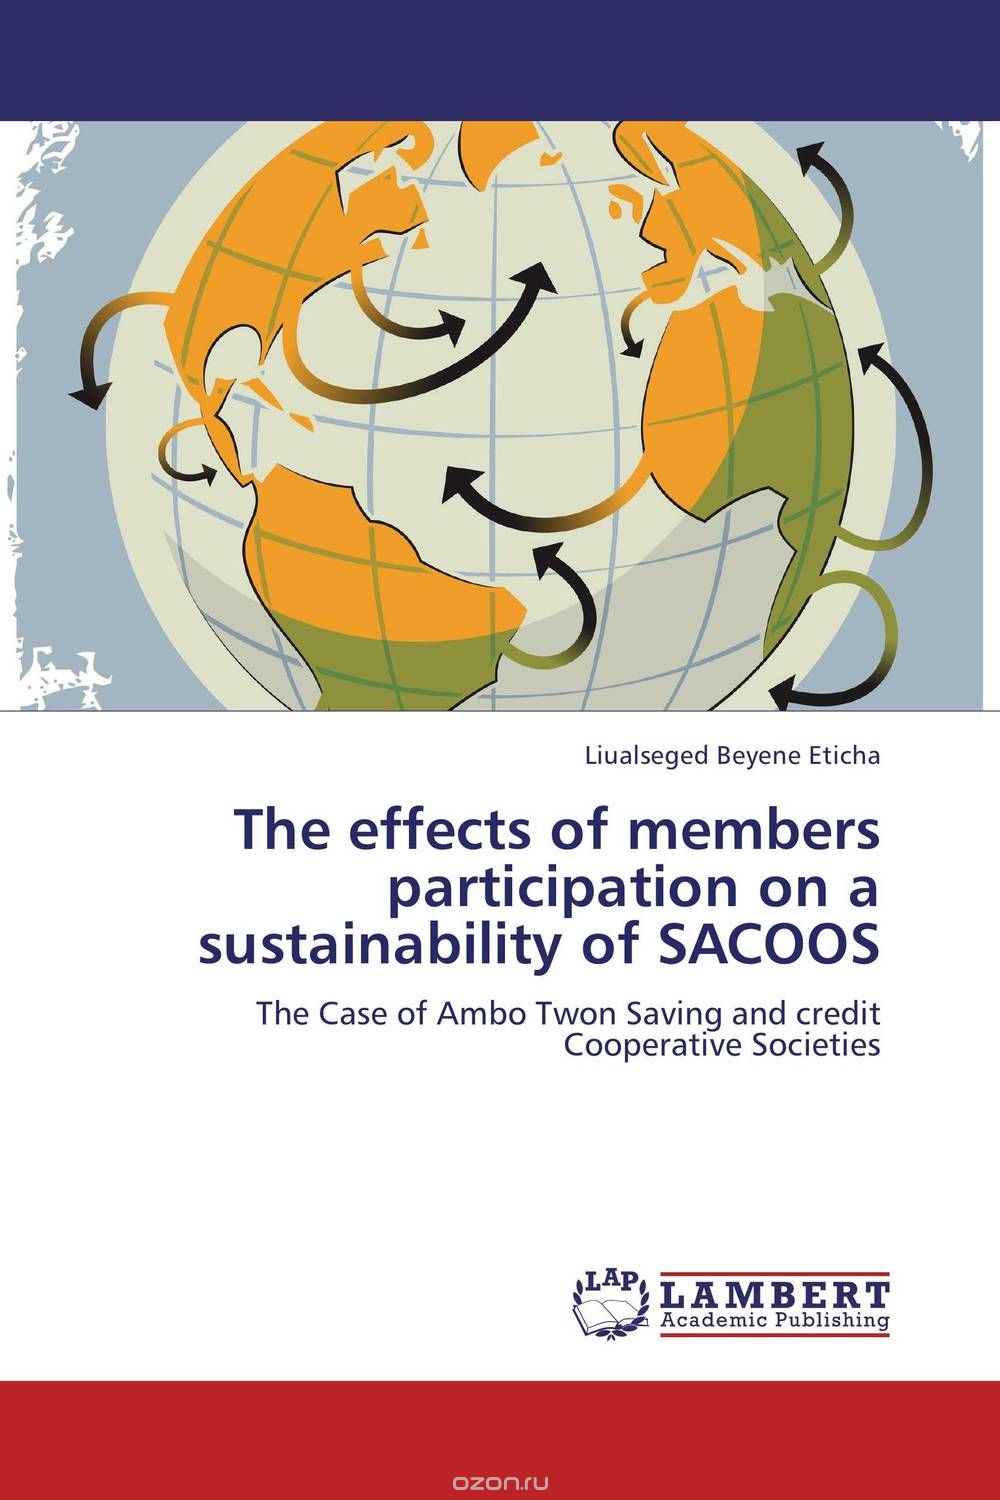 Скачать книгу "The effects of members participation on a sustainability of SACOOS"